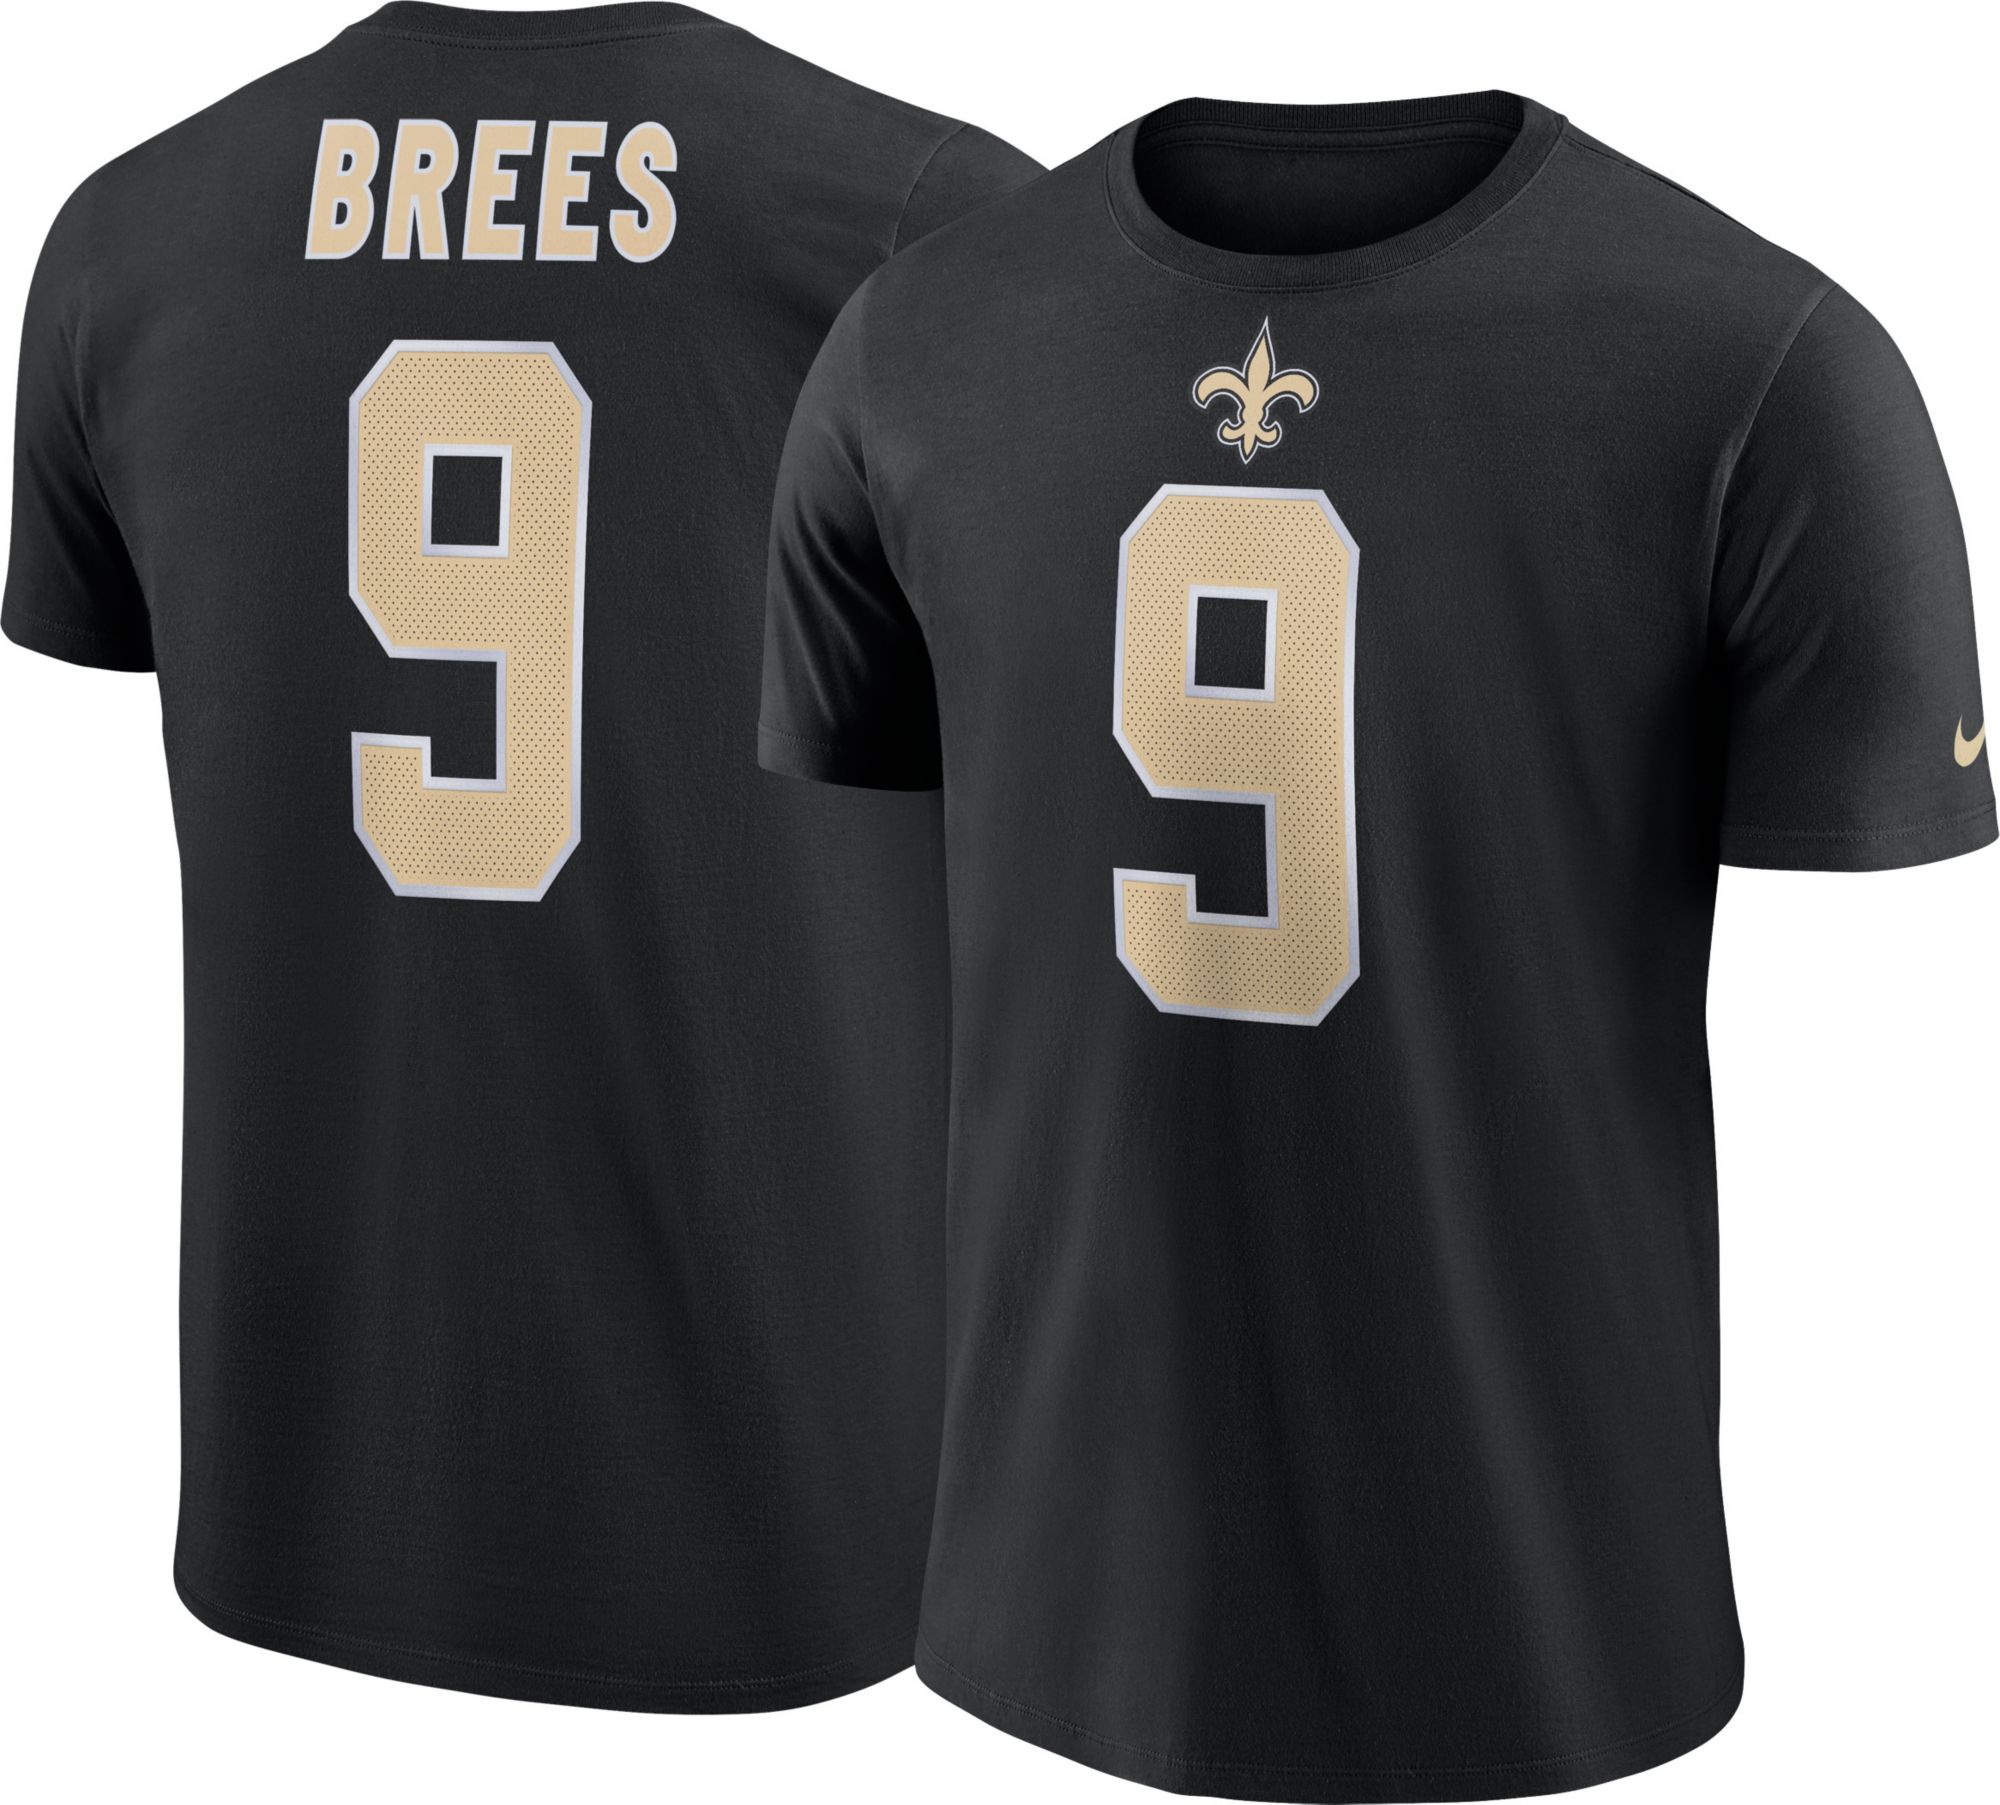 drew brees jersey number